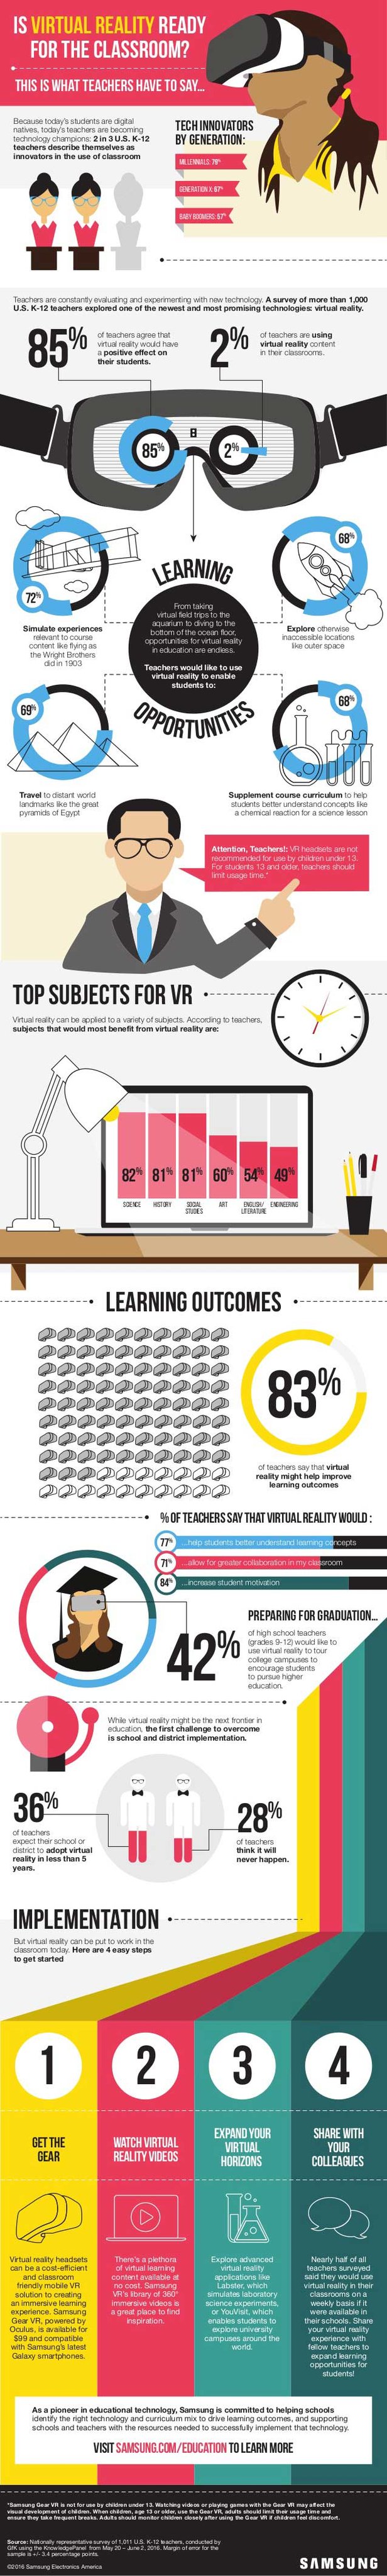 using-virtual-reality-in-the-classroom-what-teachers-think-infographic.jpg